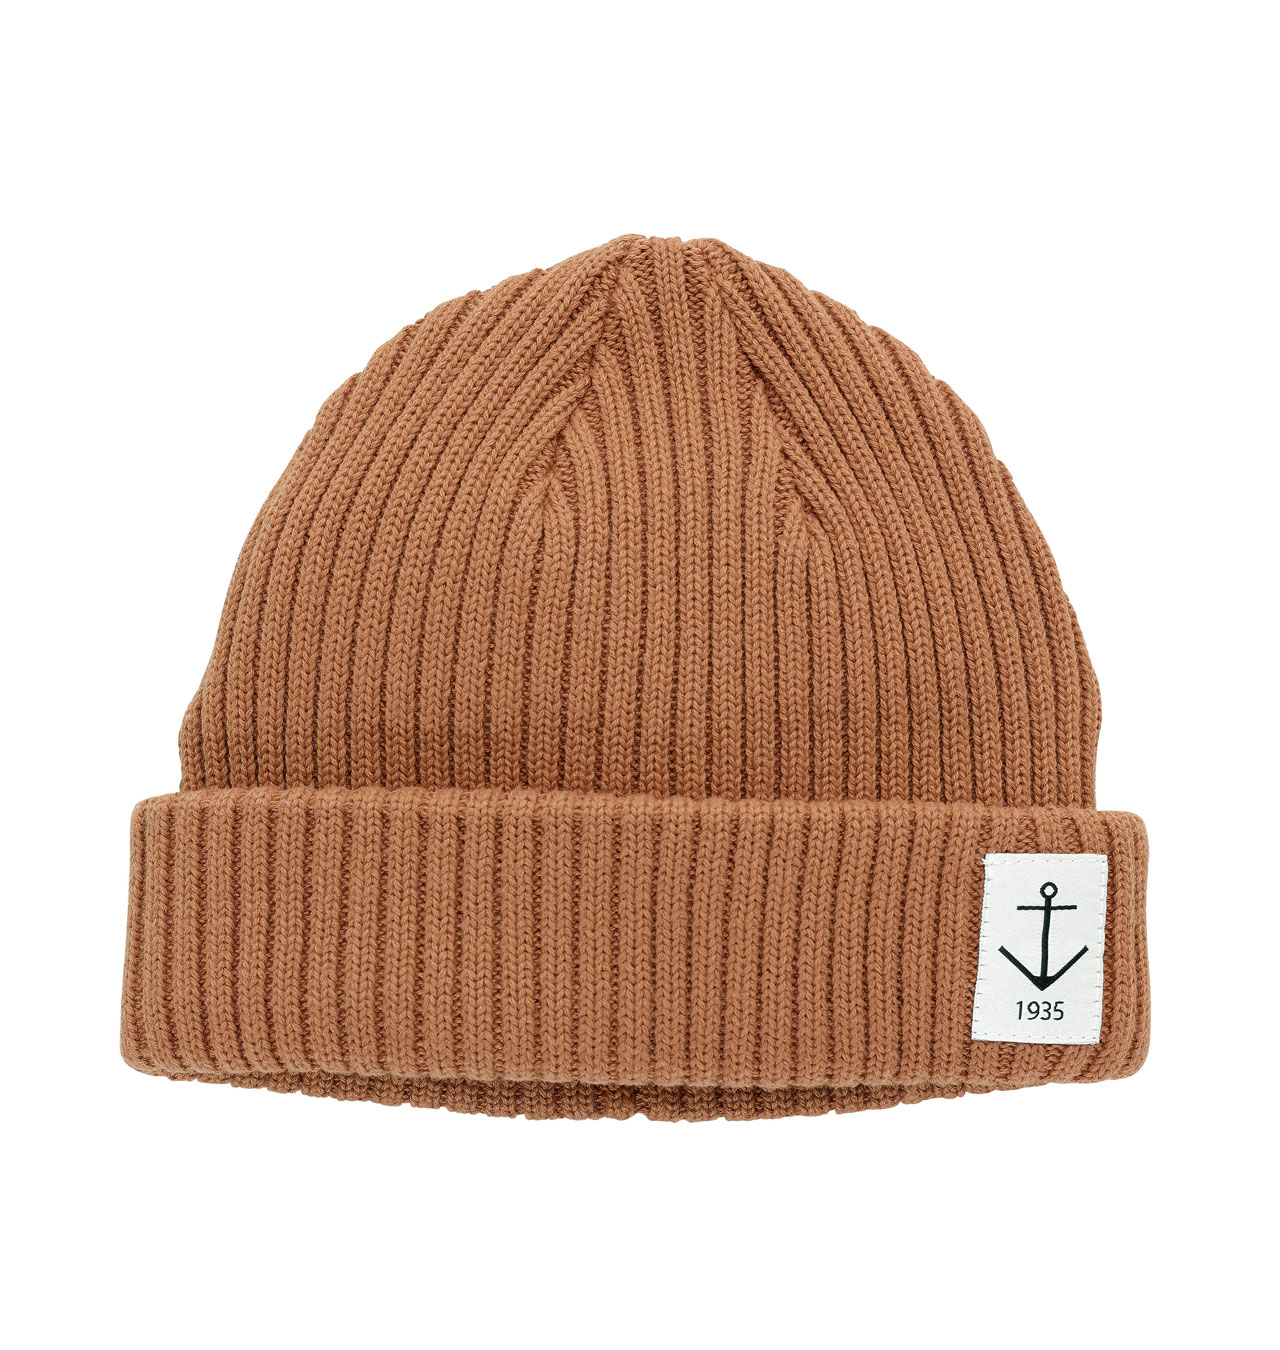 Resterods---Smula-Anchor-Beanie---LIGHT-BROWN3